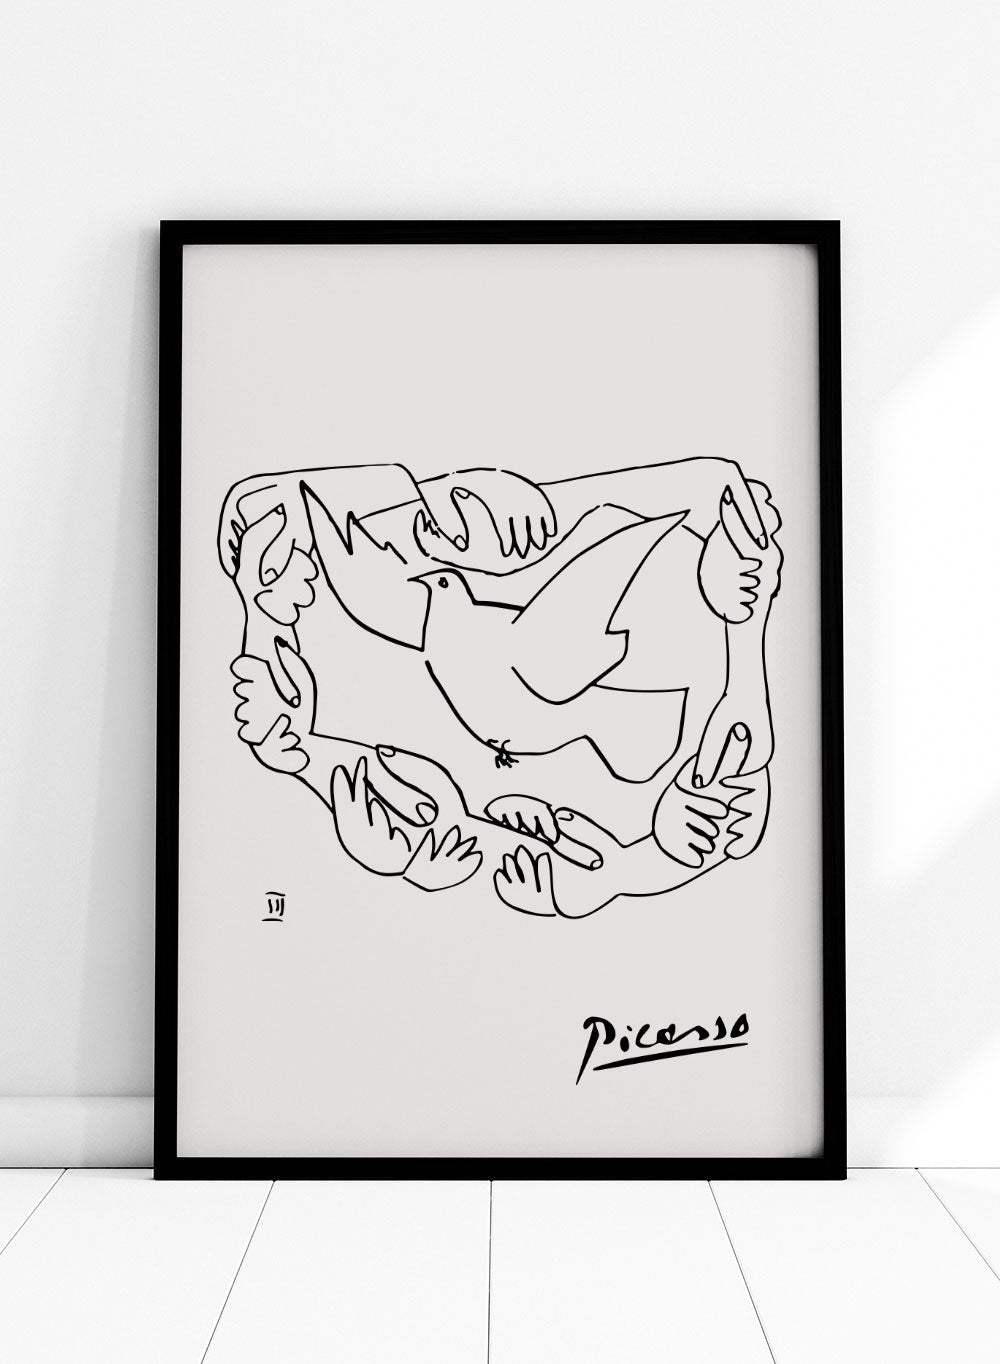 Peace and Freedom: Dove of Peace by Pablo Picasso Print